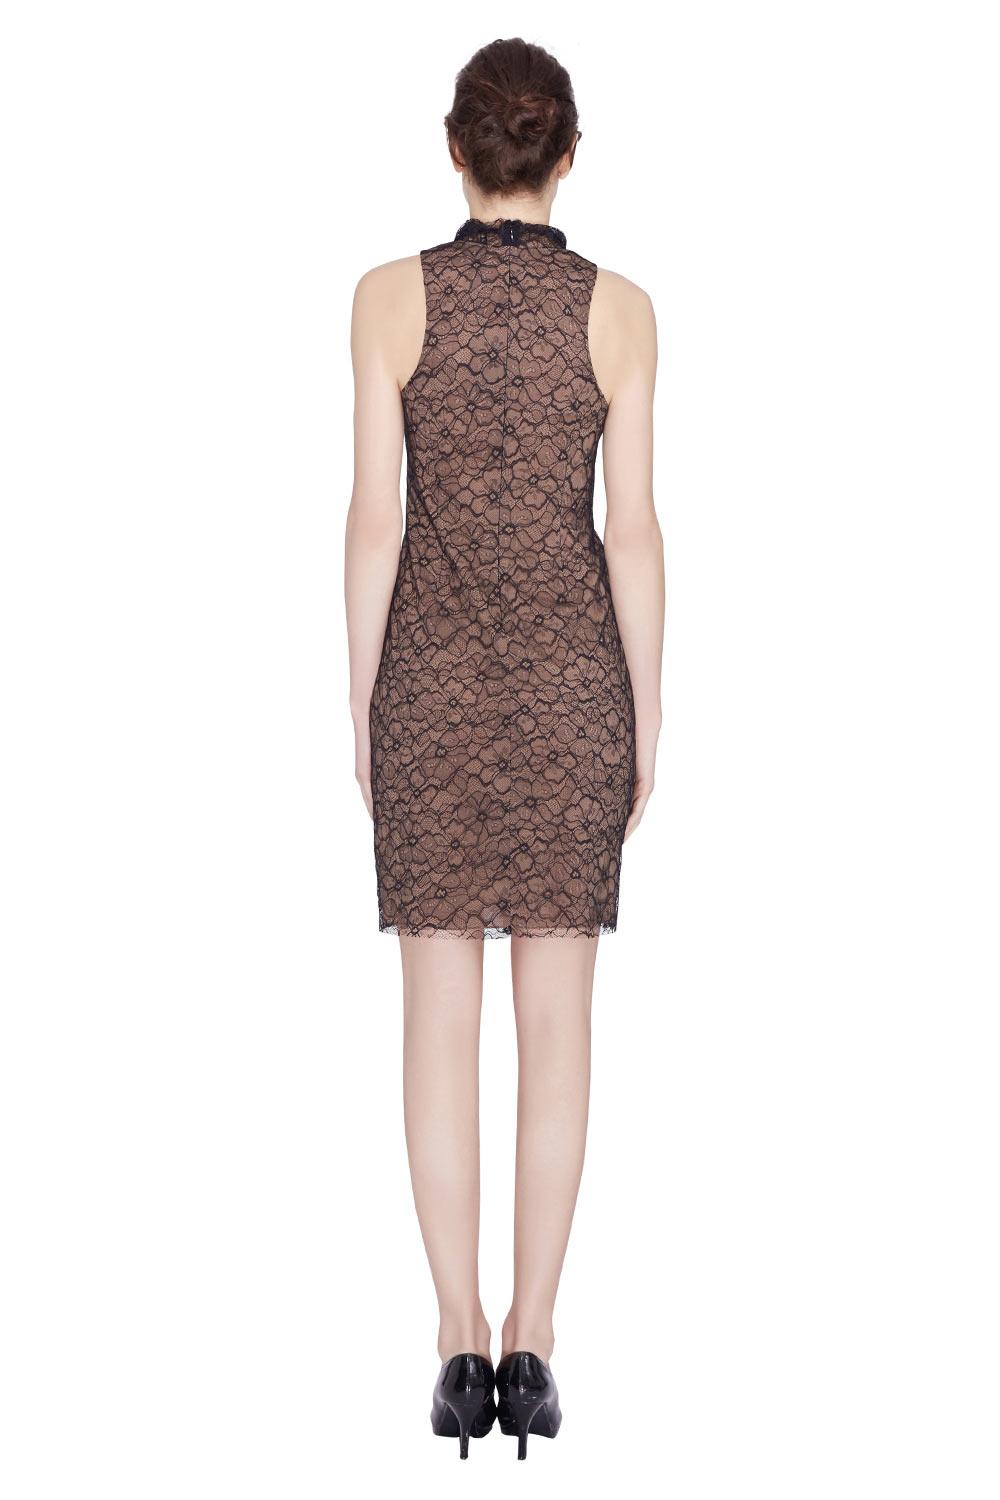 This sleeveless dress is pretty, decent and stylish. From the fabulous Vera Wang collection comes this black dress, tailored from a nylon blend and designed with floral lace pattern. Featuring a high cowl neck, it will look great with matching heels